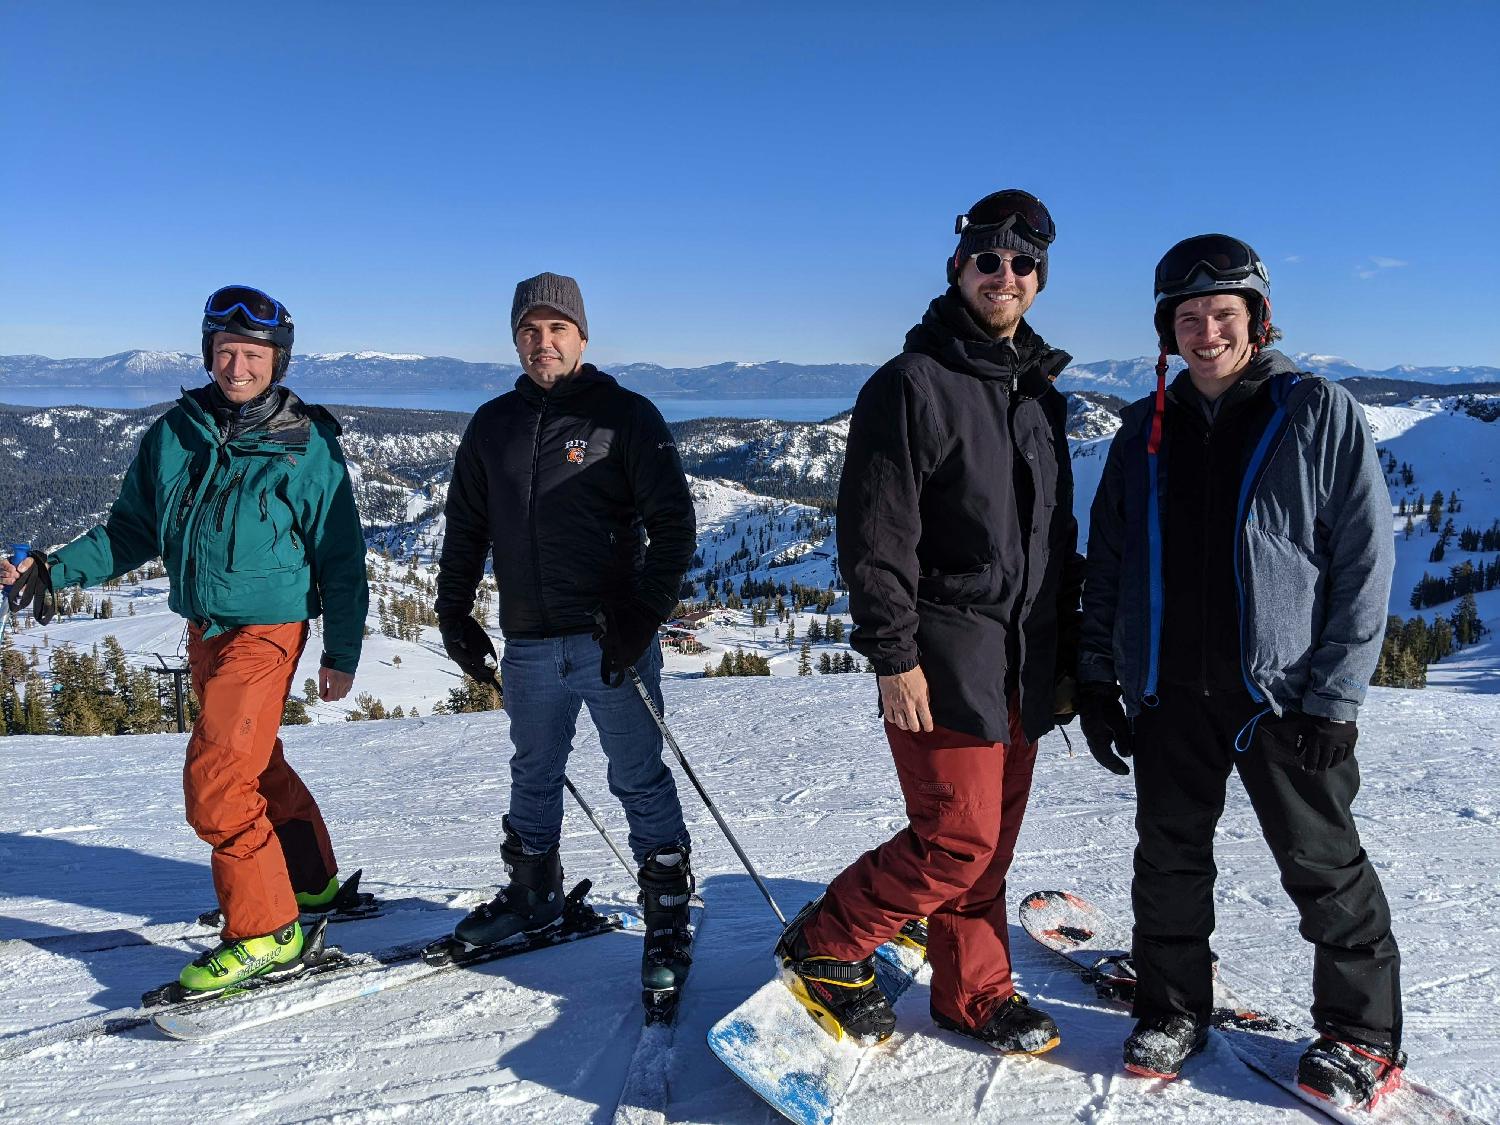 OneSignal company offsite at Squaw Valley 